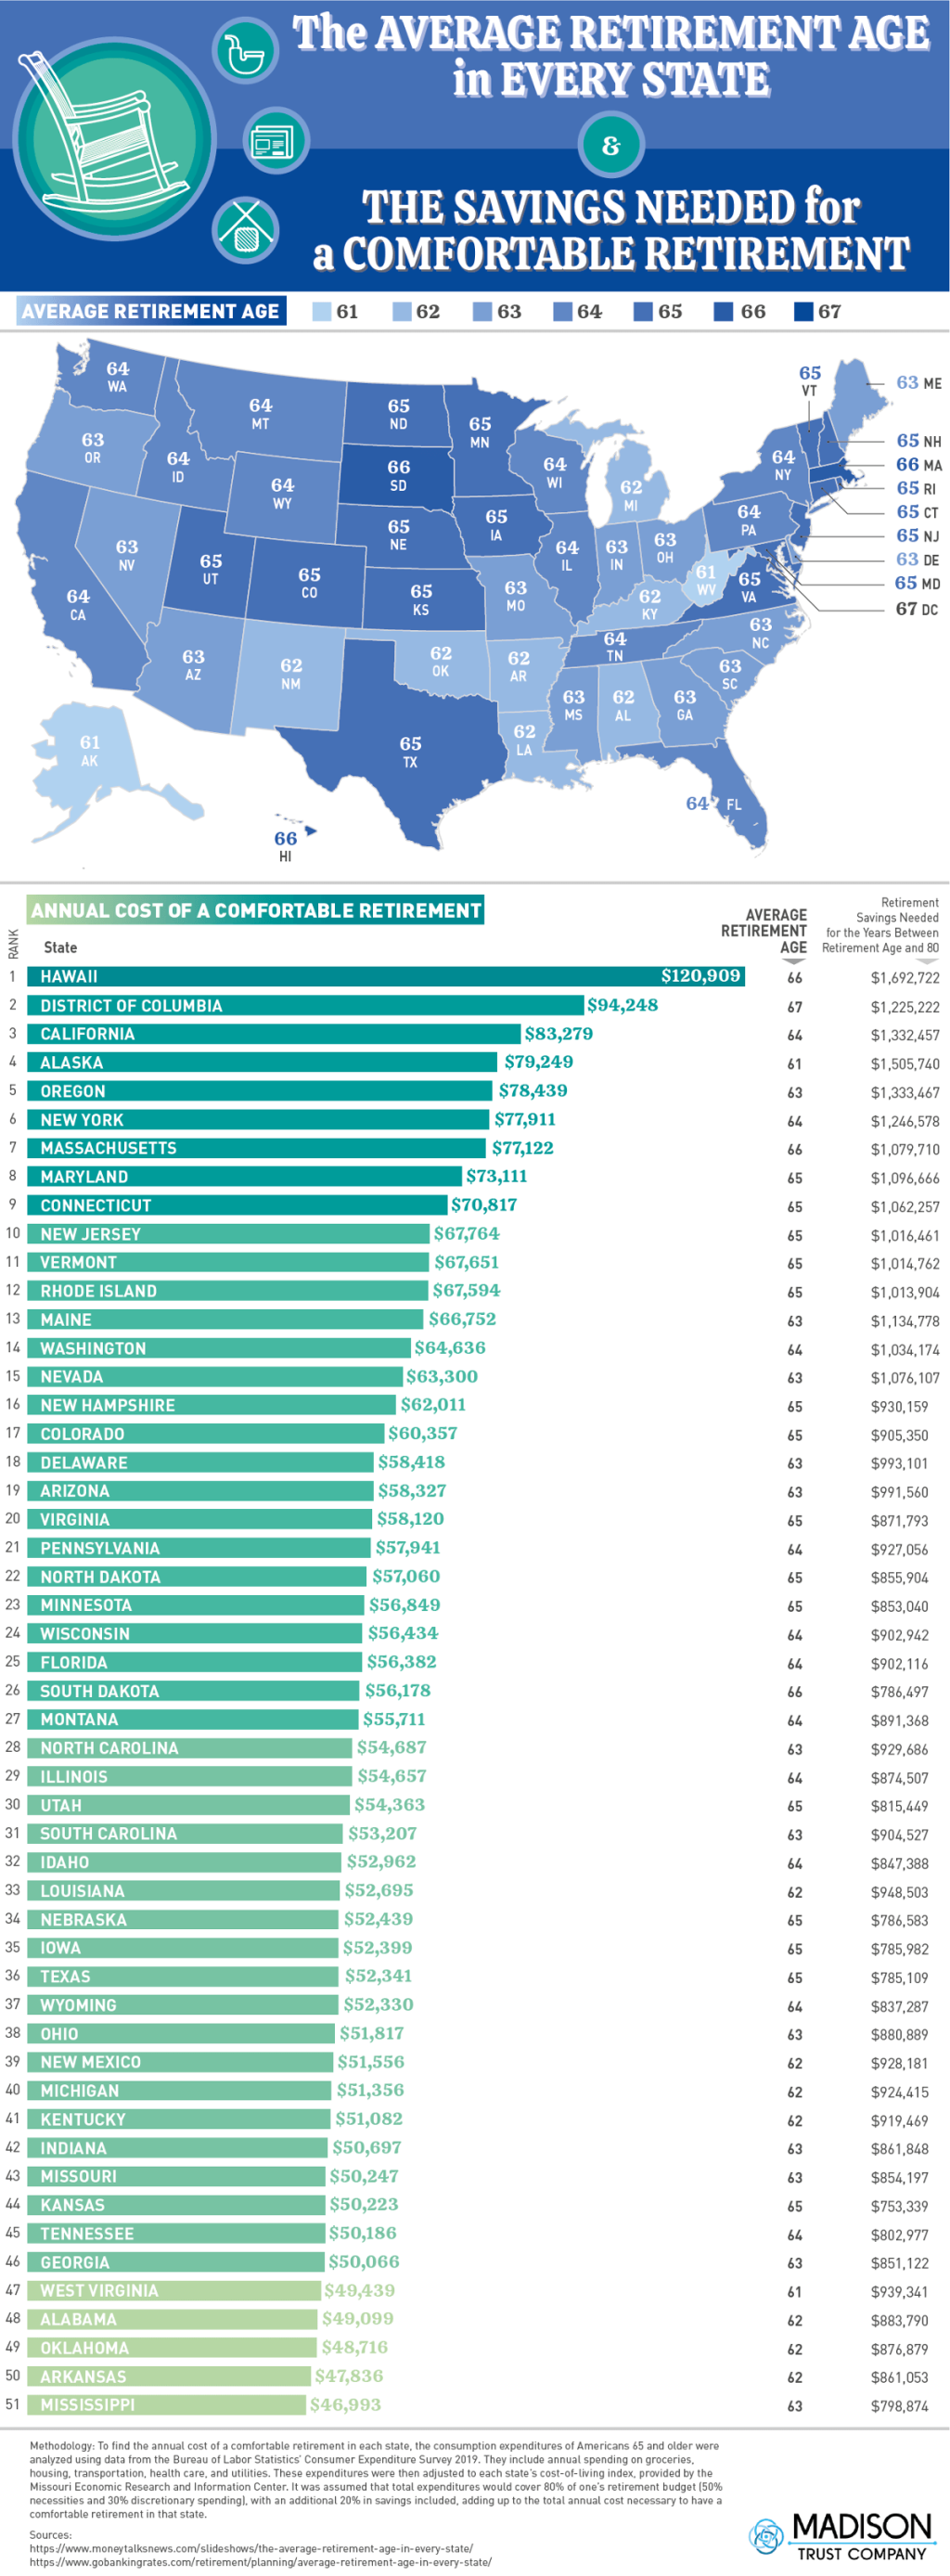 Picture of: The Average Retirement Age in Every State and the Savings Needed